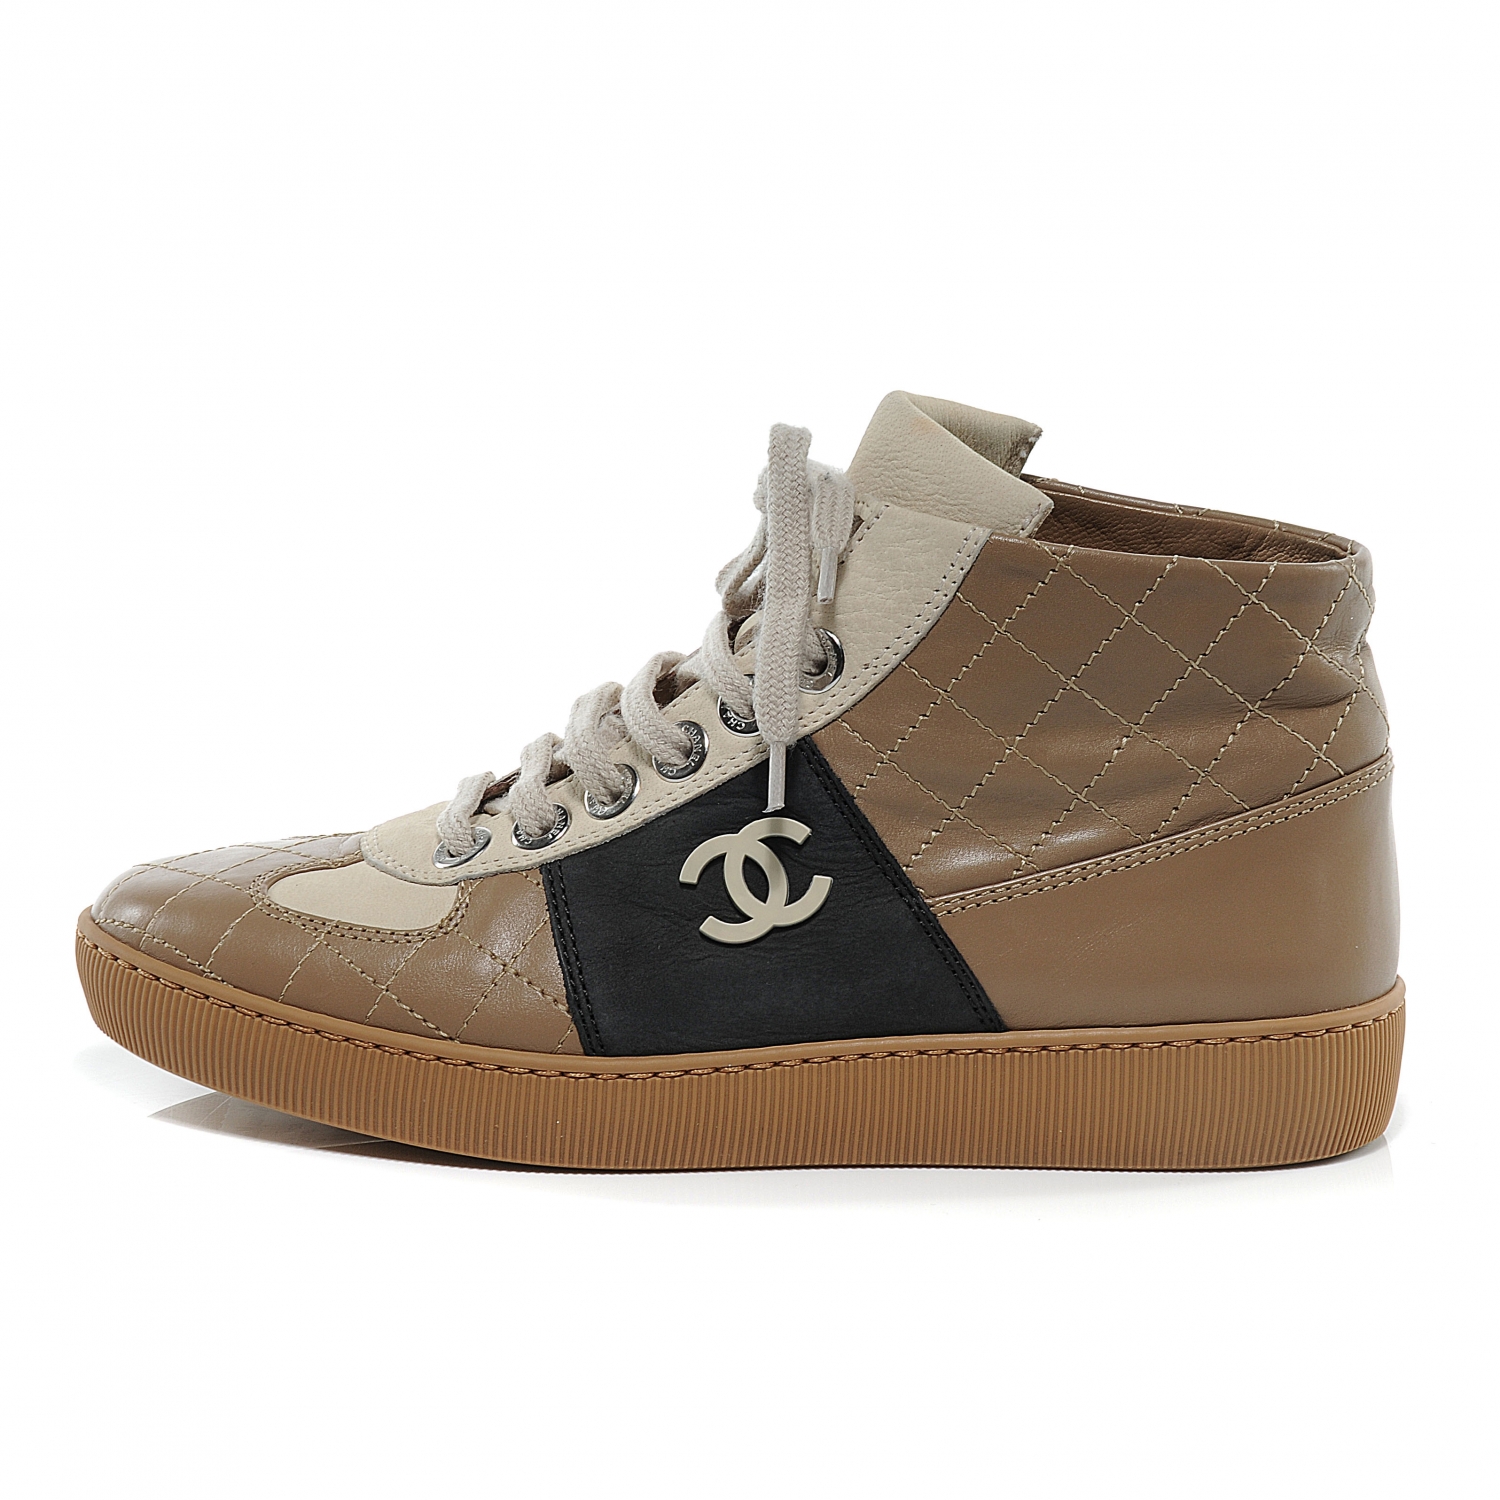 CHANEL Leather Quilted Hightop Tennis Shoes 6 Beige 52194